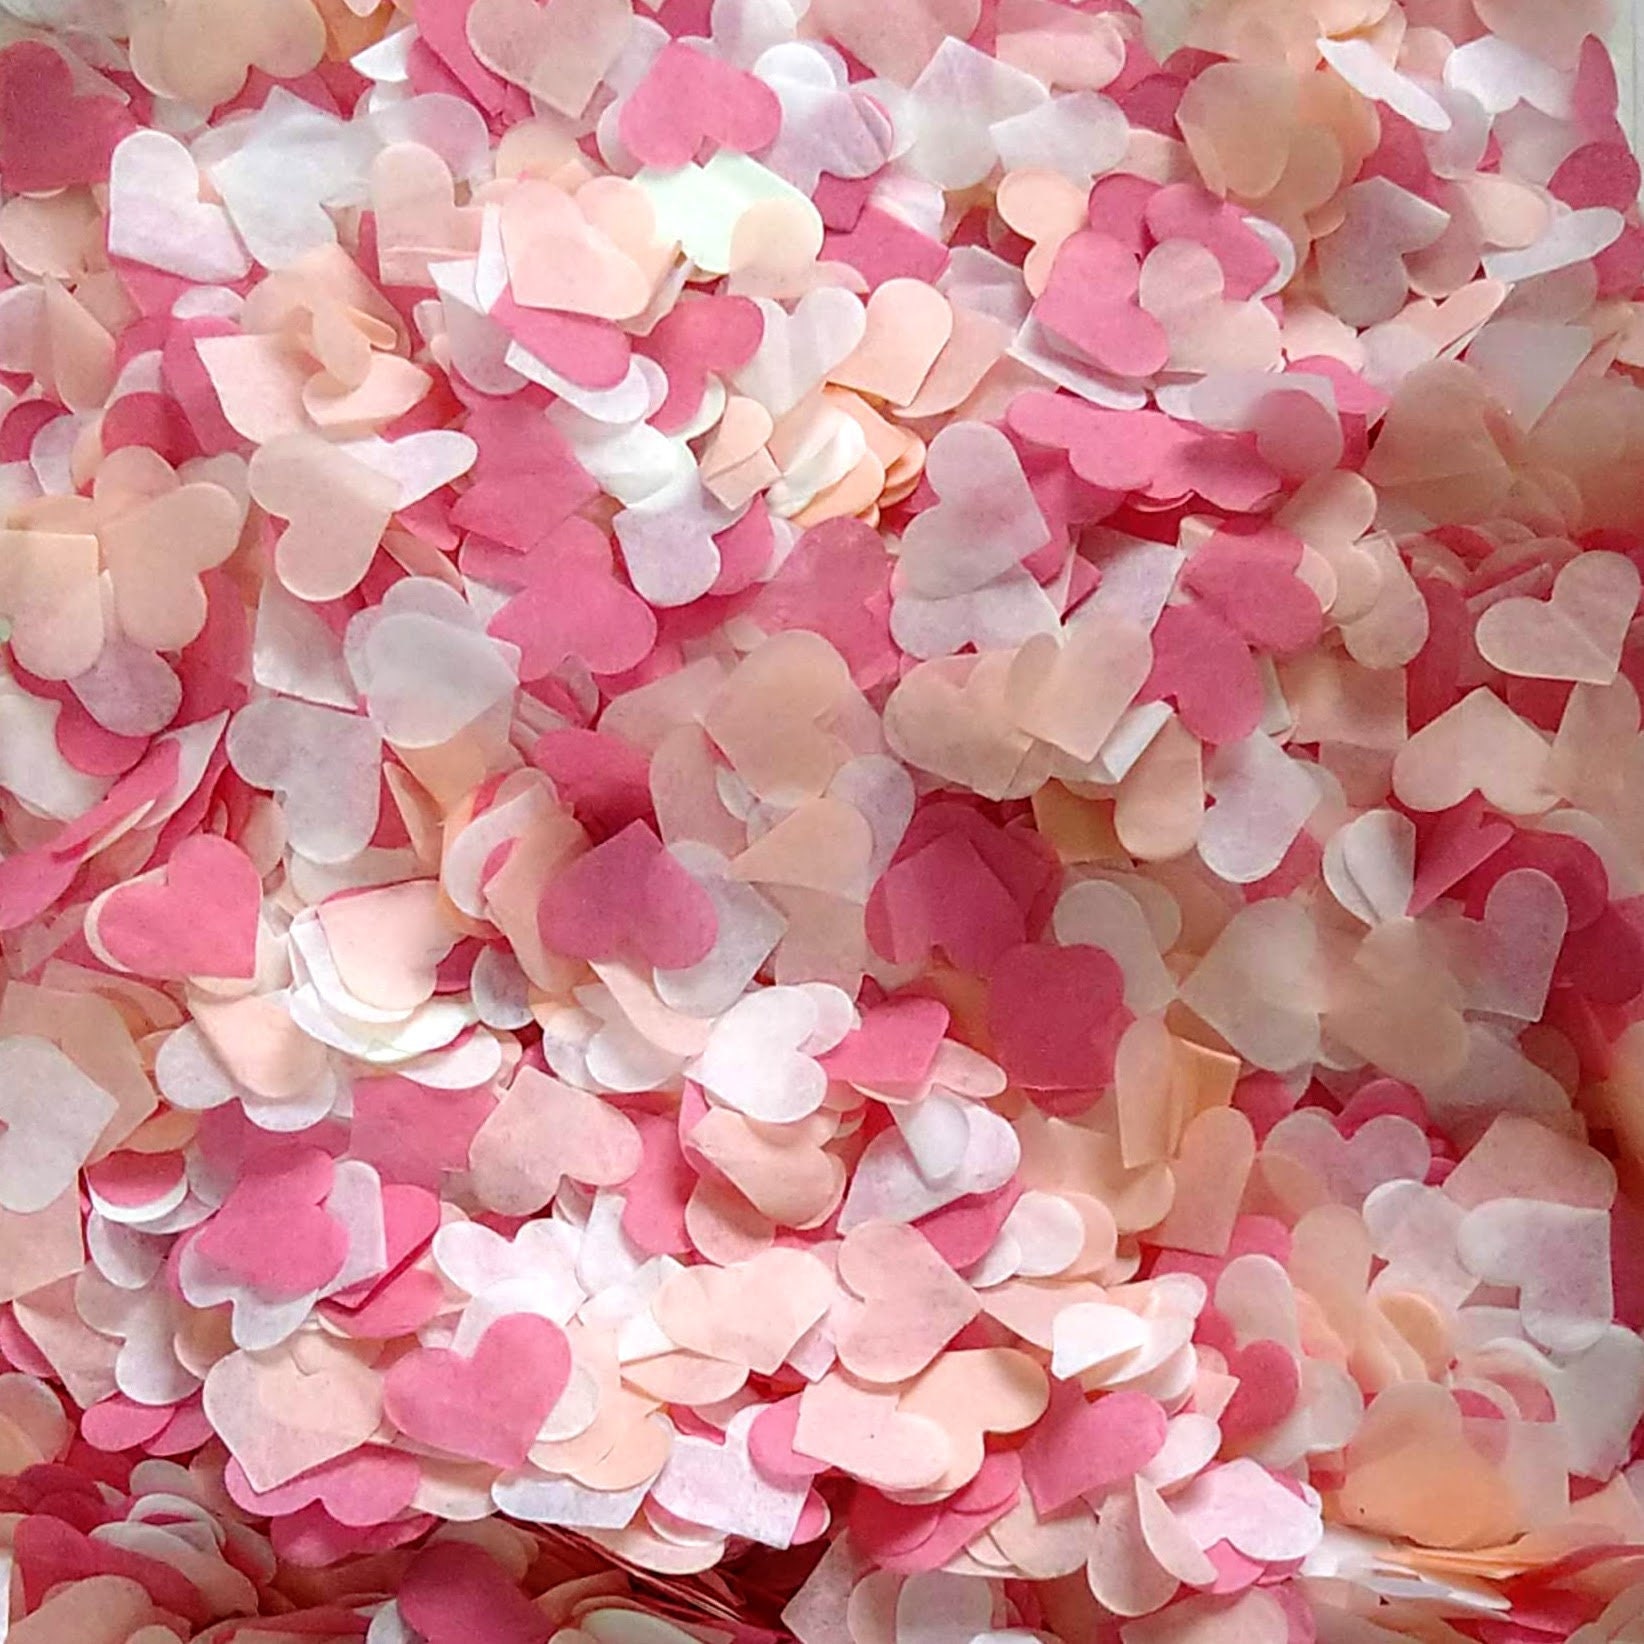 Biodegradable Wedding Confetti Rainbow Eco Friendly Tissue Paper Hearts  Kids Party Table Decoration for Balloons 5 TO 100 HANDFULS 